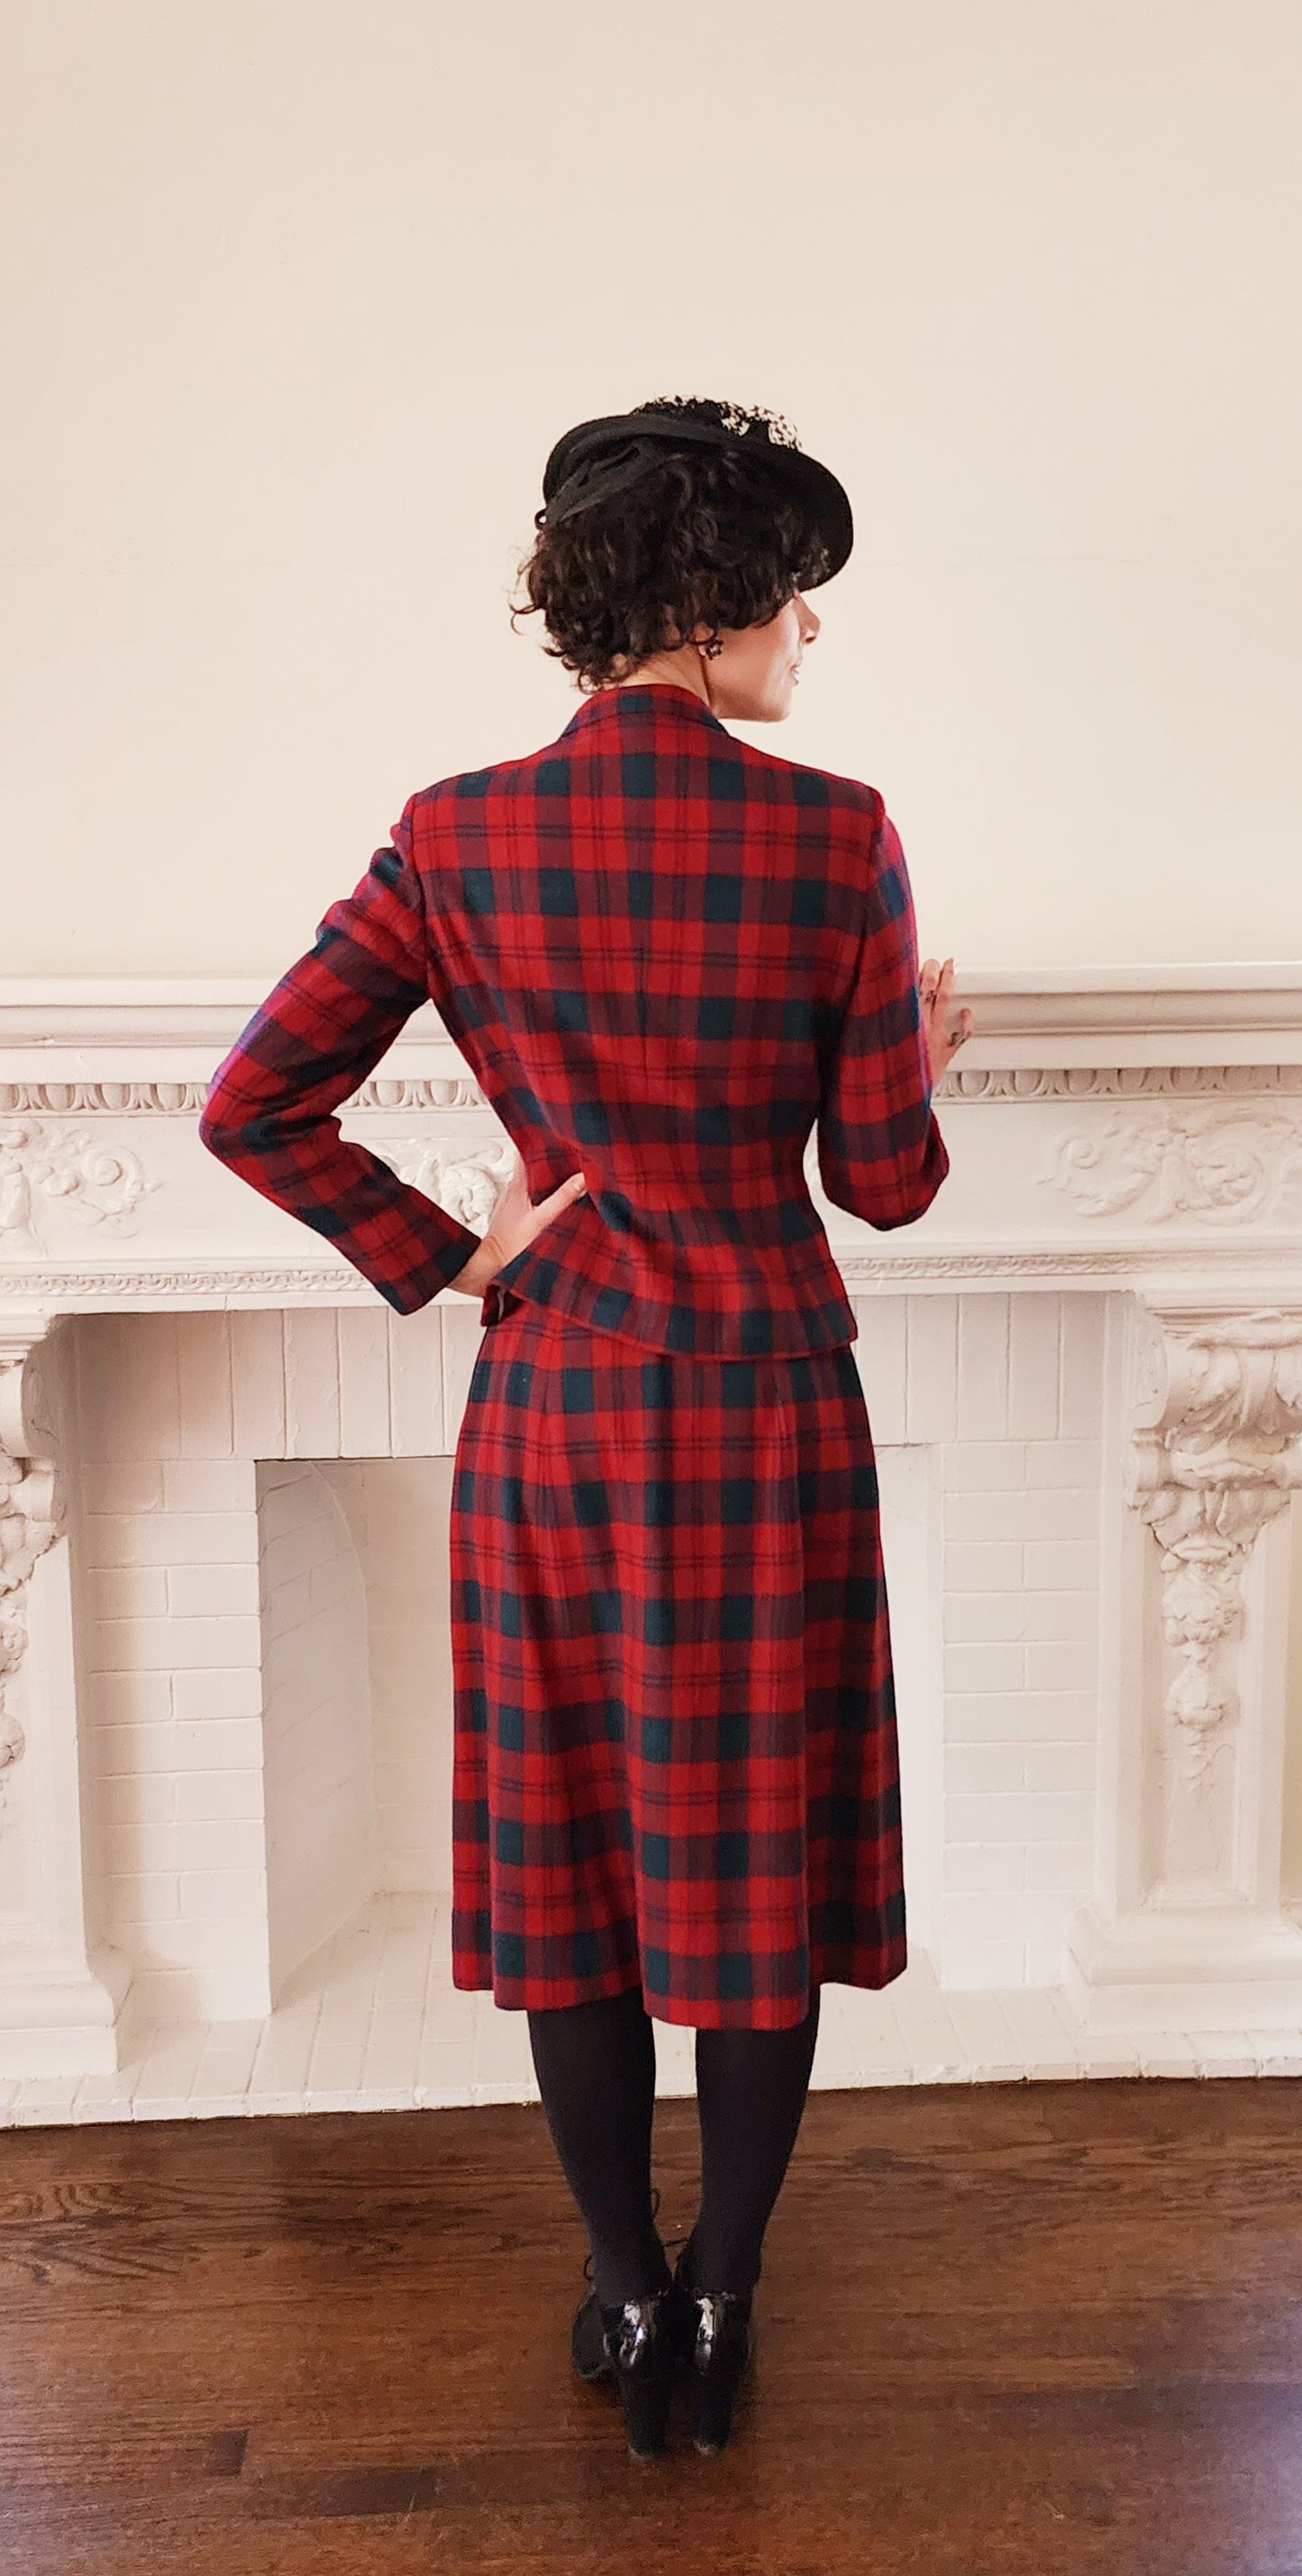 40s 50s Red Plaid Skirt Suit Best & Co. by Bardley Lindsay Tartan Small